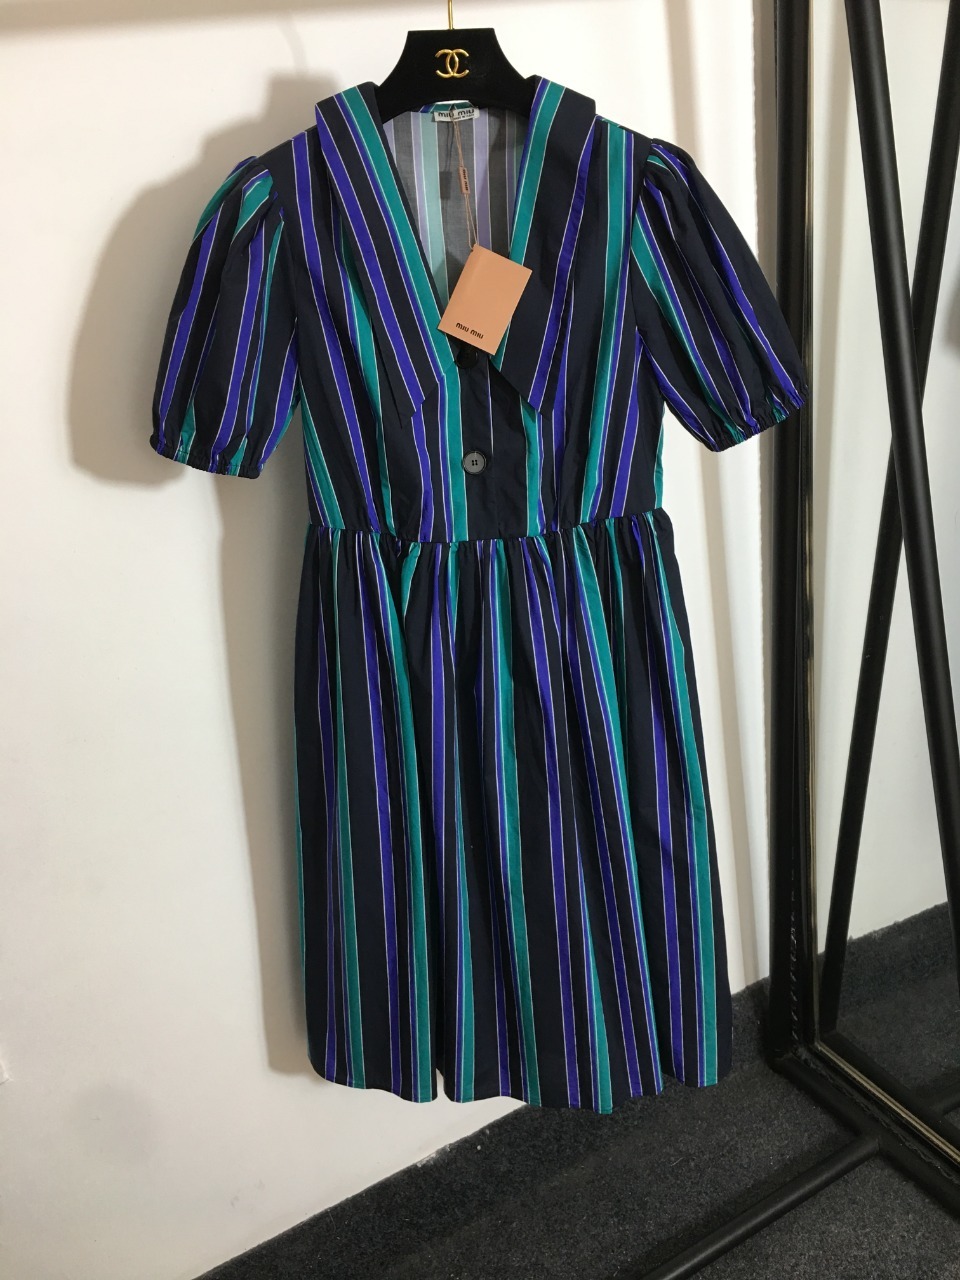 Dress from vertical strips